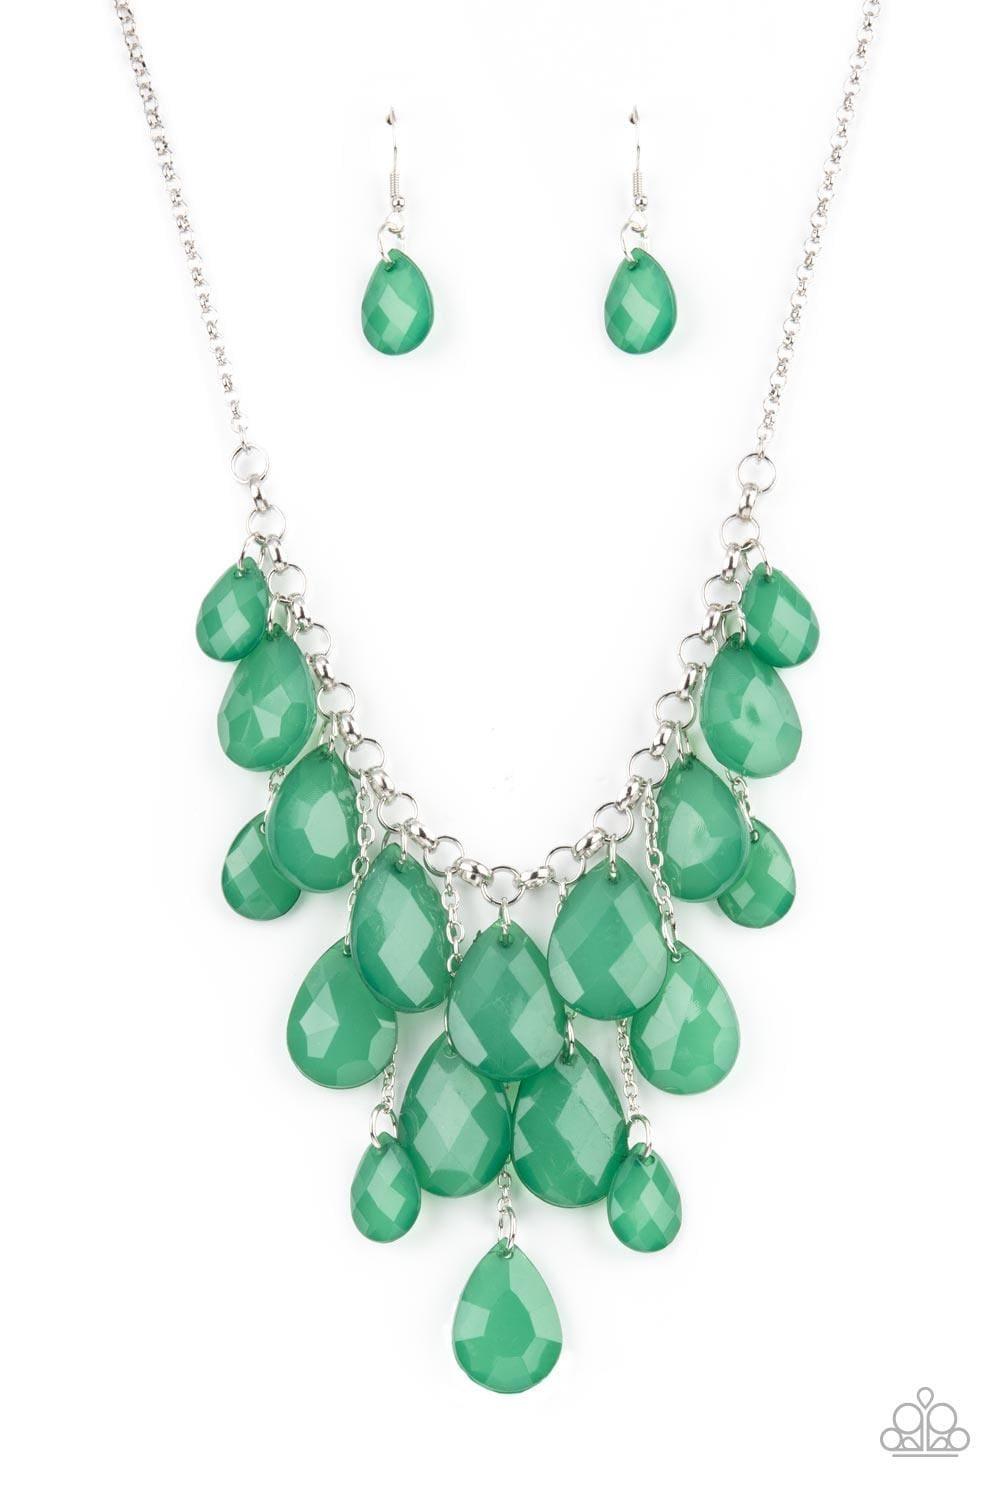 Paparazzi Accessories - Front Row Flamboyance - Green Necklace - Bling by JessieK